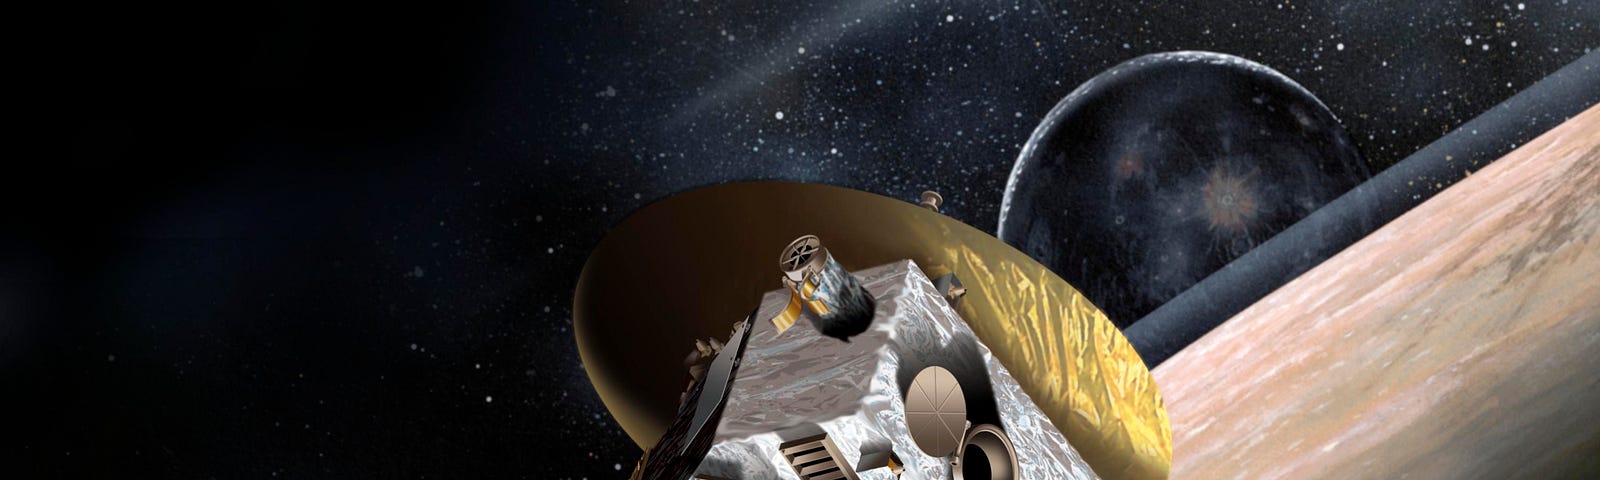 An artists impression of a space probe in flight around a planet, with a moon in near distance and a sun in a far distance